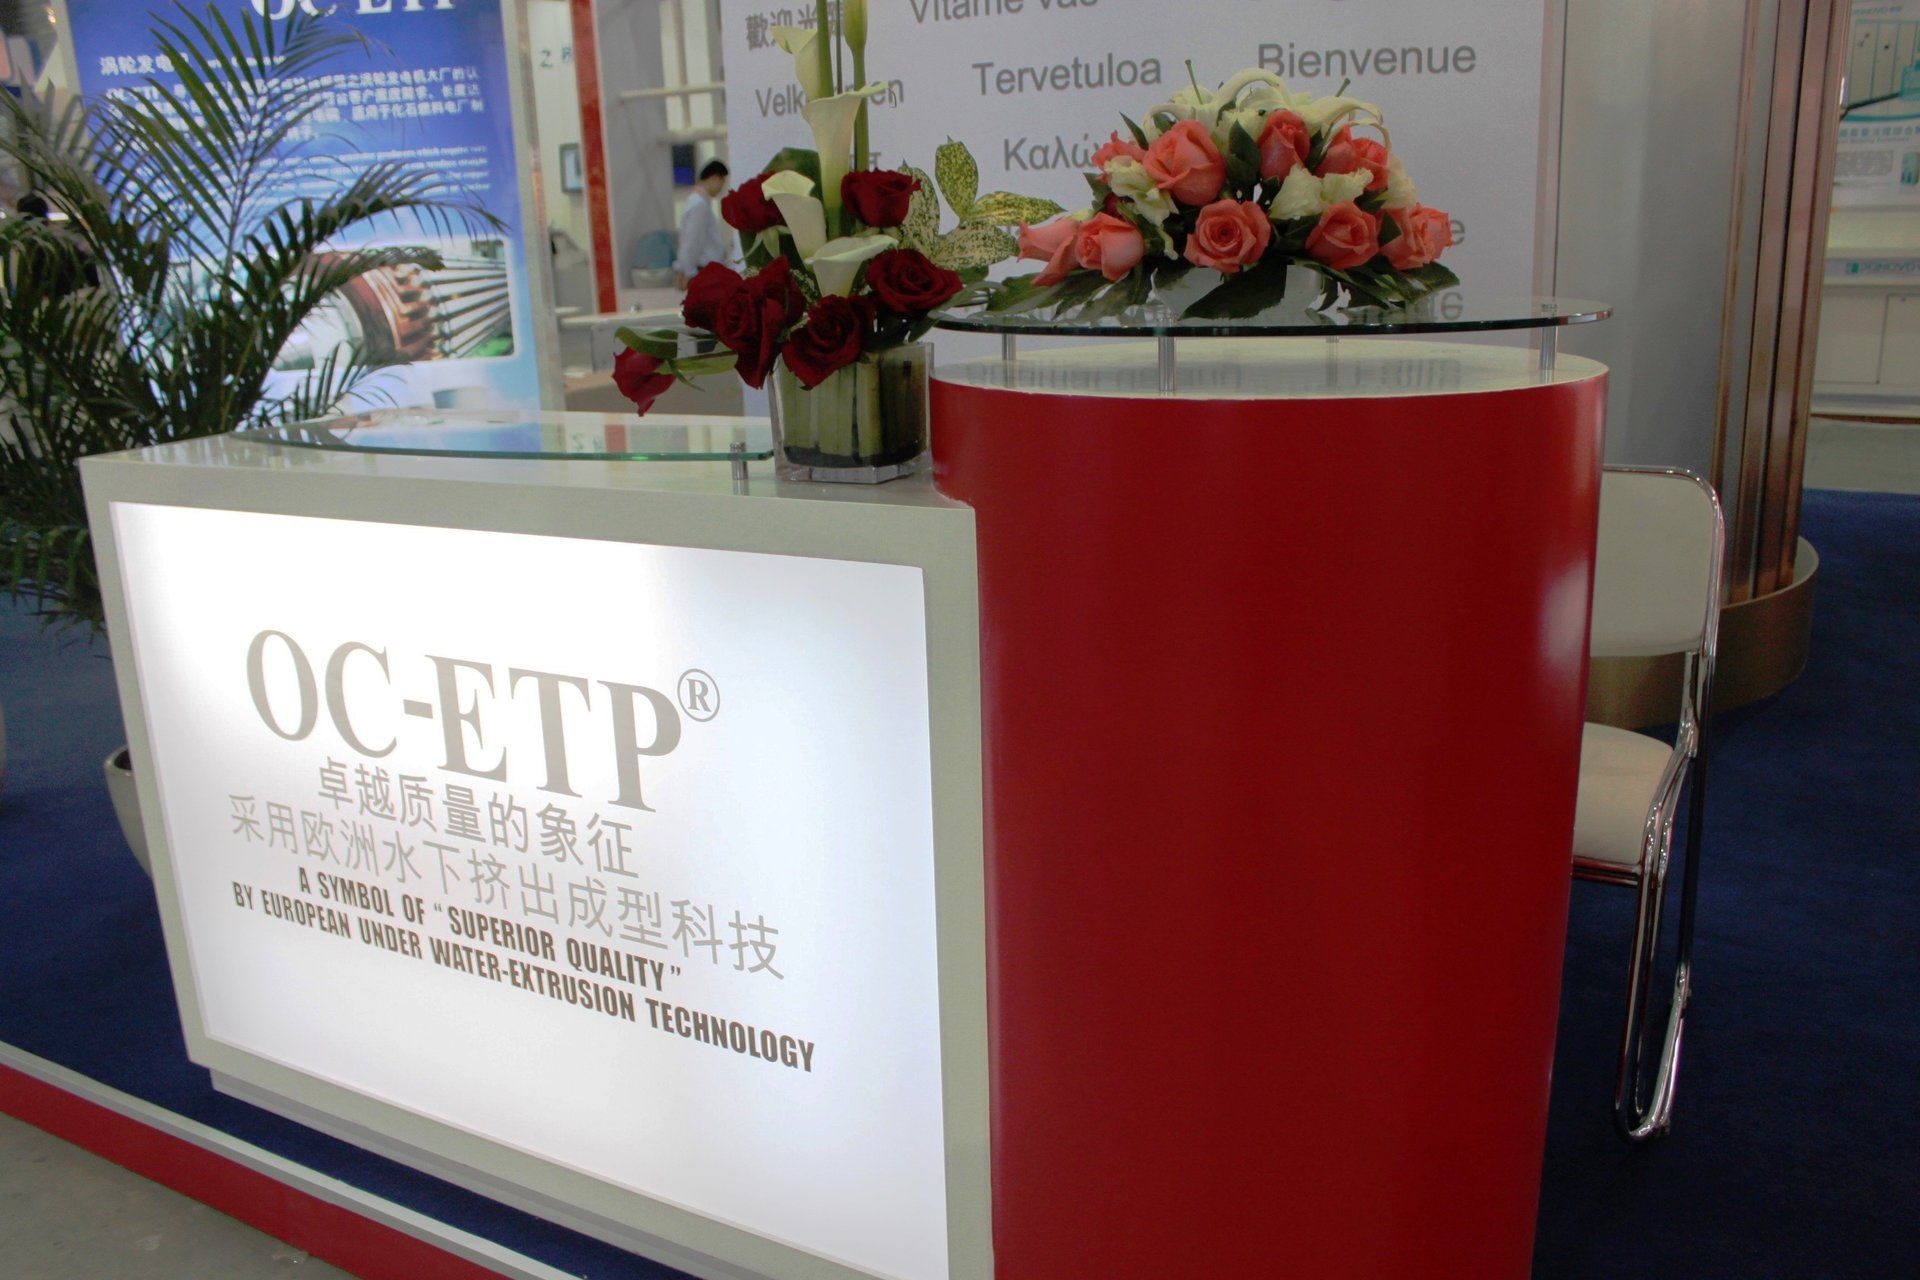 Oriental Copper @ China E-power 2011. Booth designed and built by Essential Global Fairs.